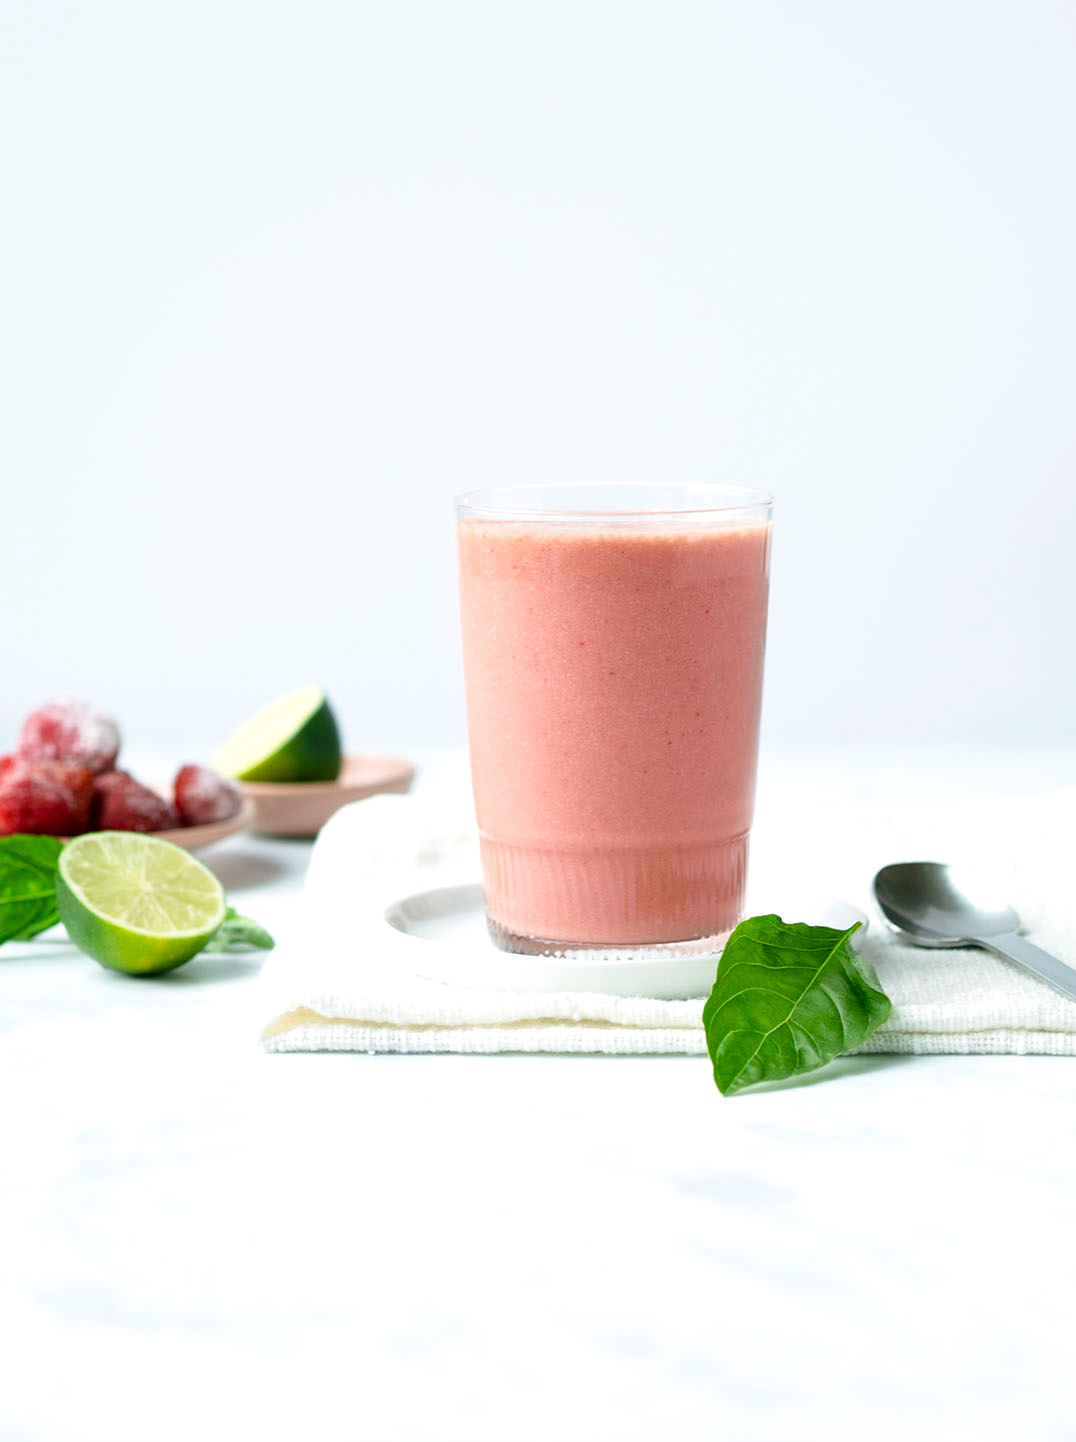 A glass filled with a beautiful pink smoothie surrounded by frozen strawberries, cut limes, and a basil leaf 